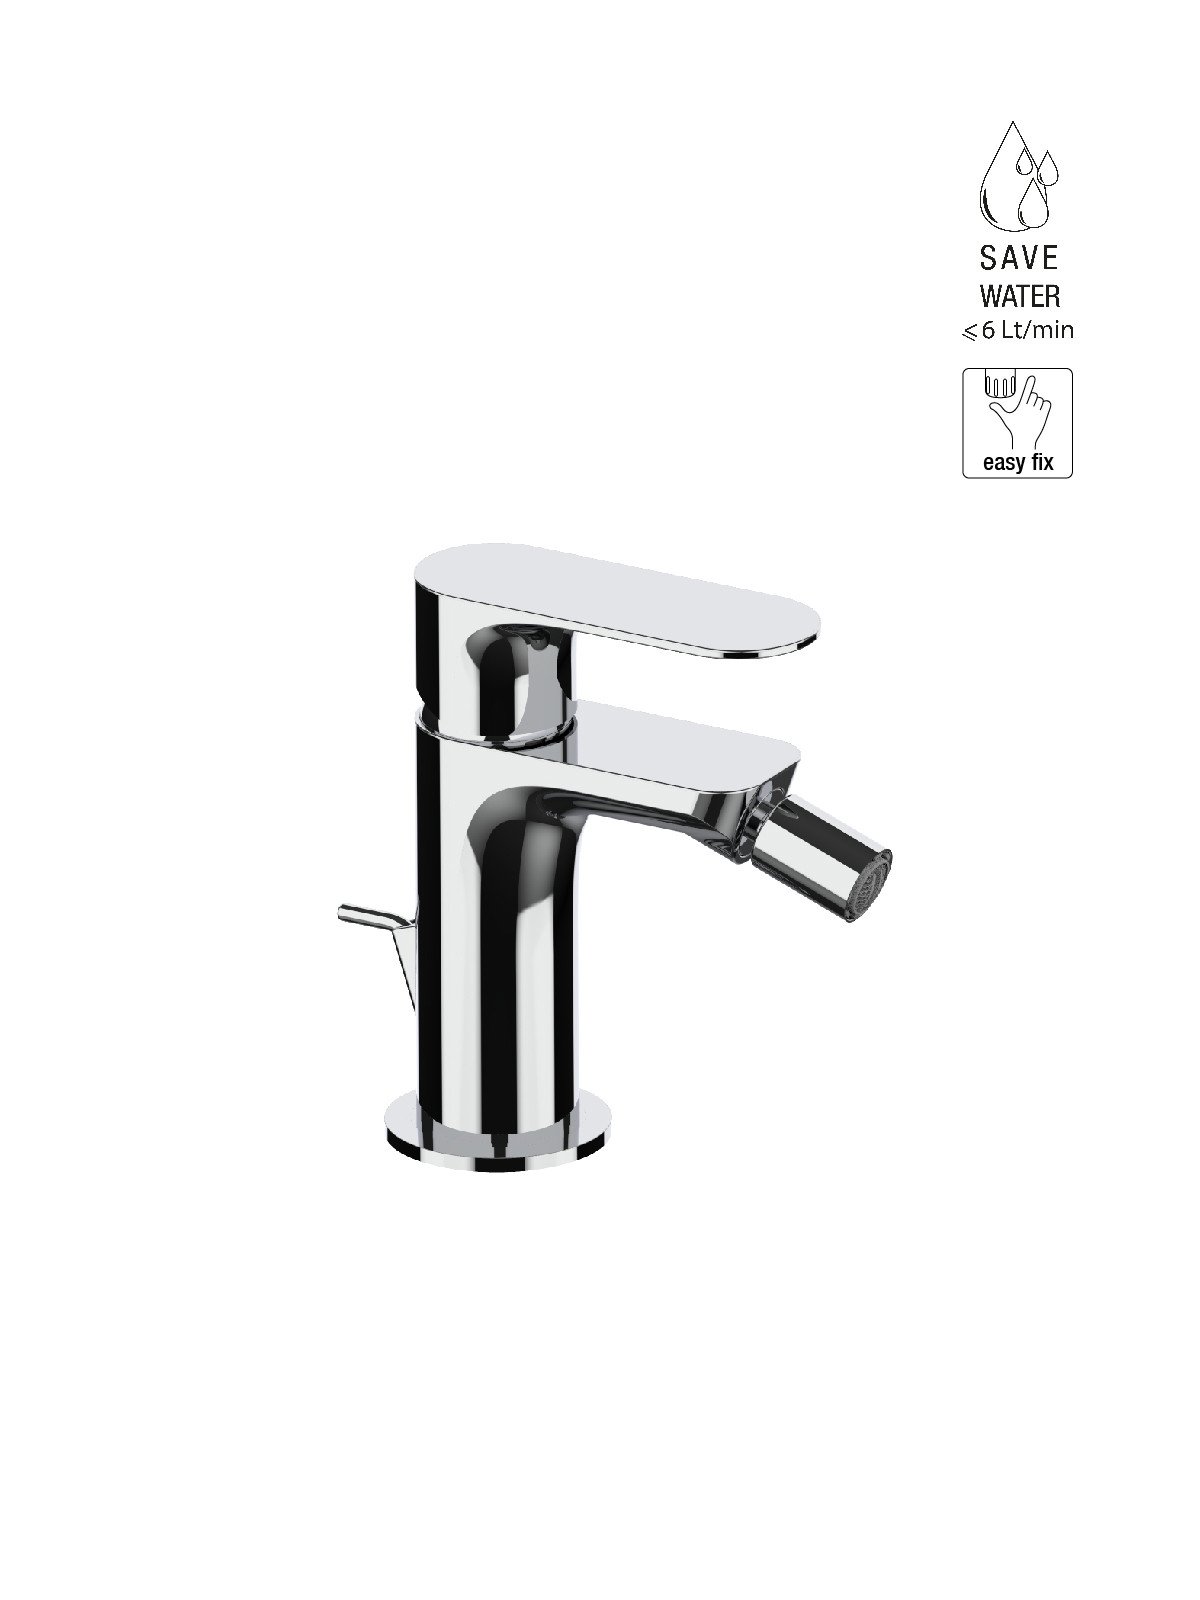 Single-lever bidet mixer with 1”1/4 pop-up waste